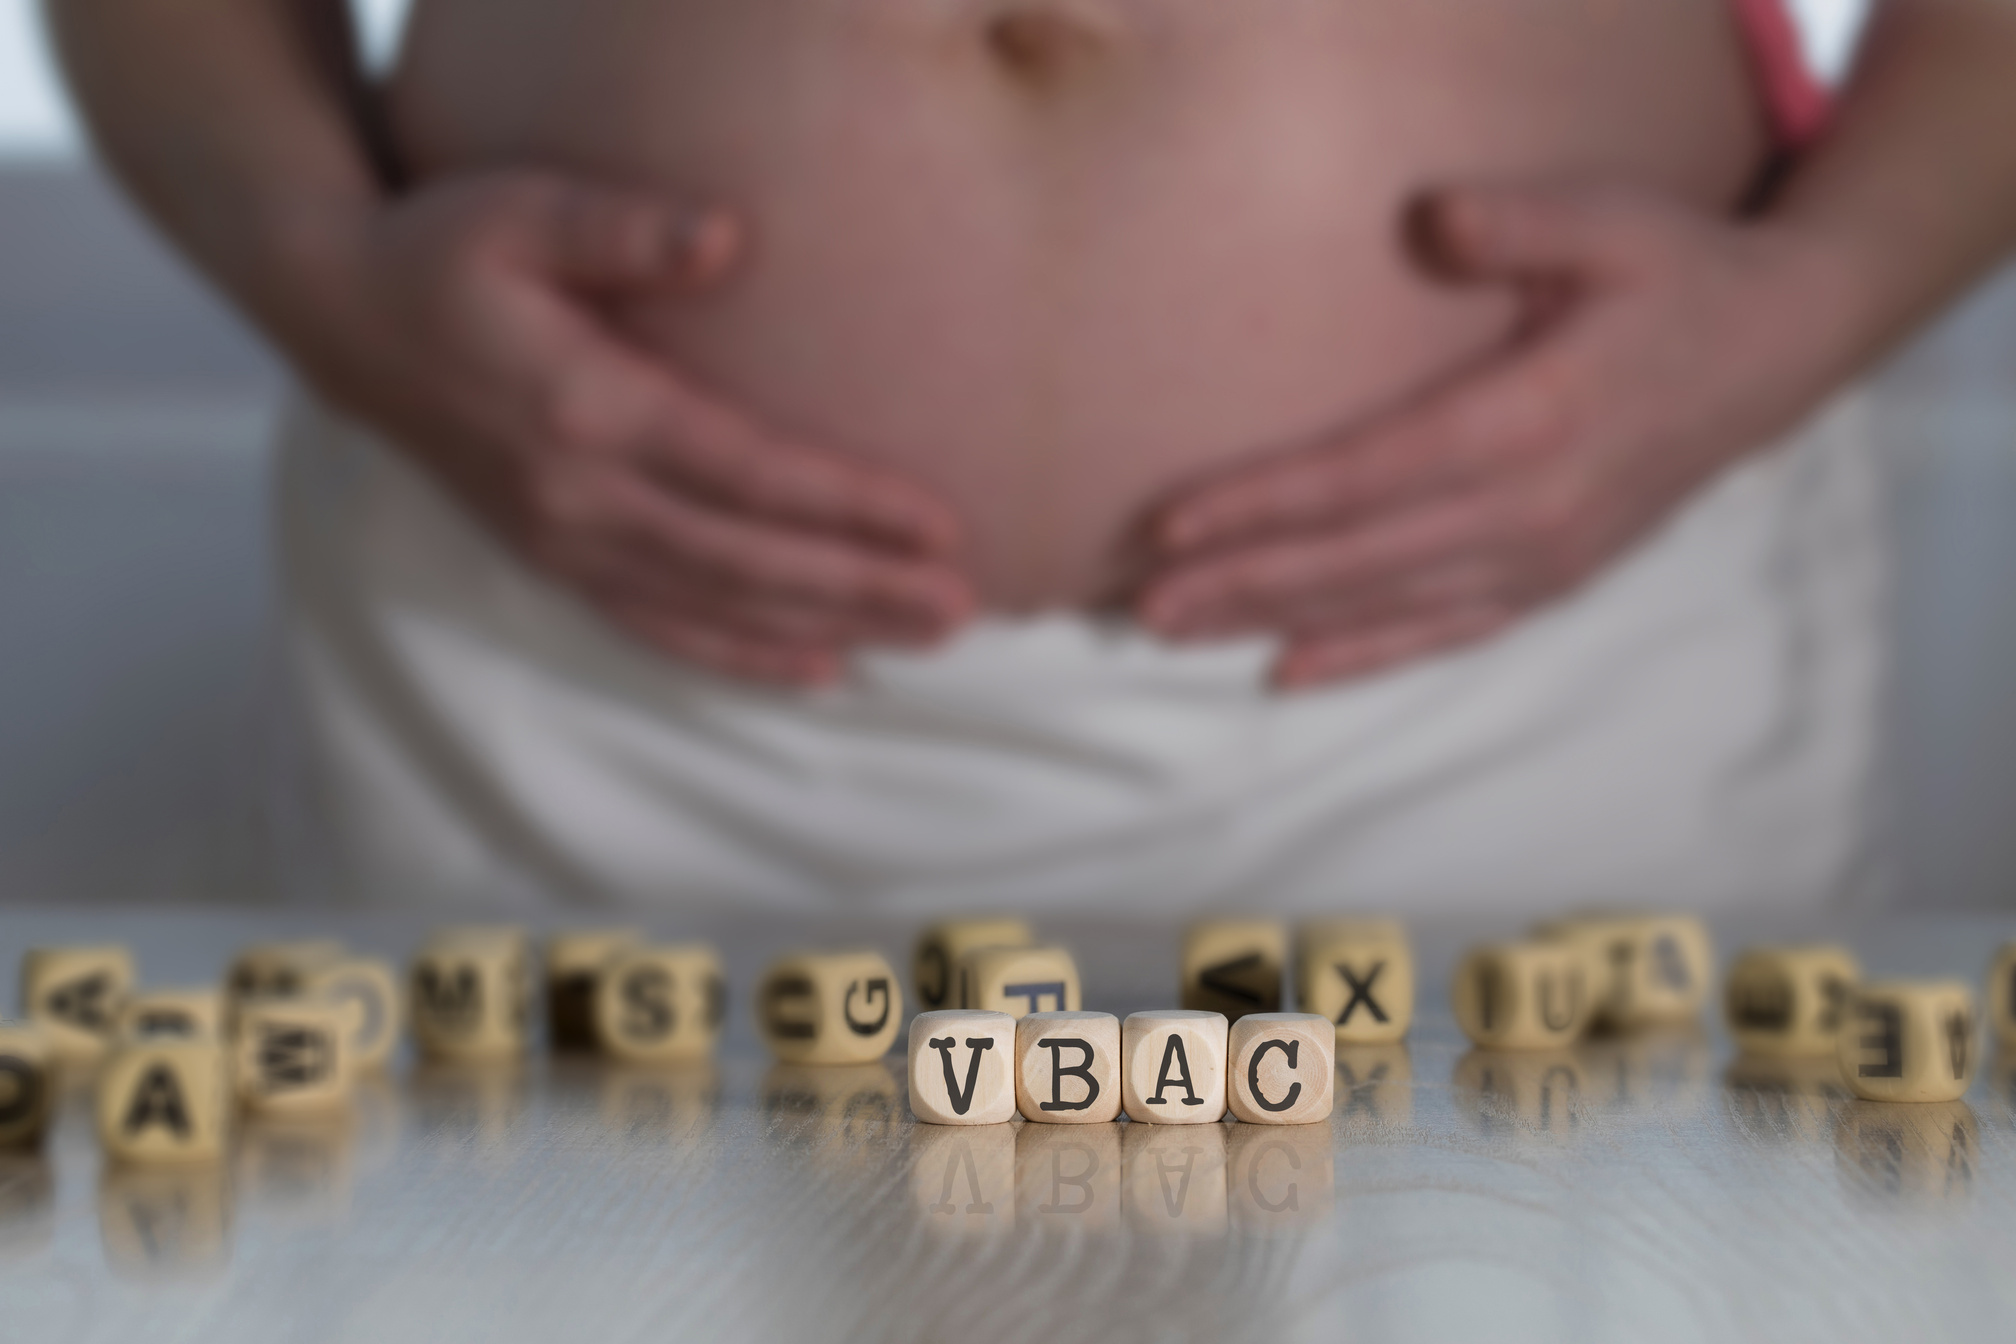 Abbreviation VBAC composed of wooden letters for Vaginal Birth after Caesarean.